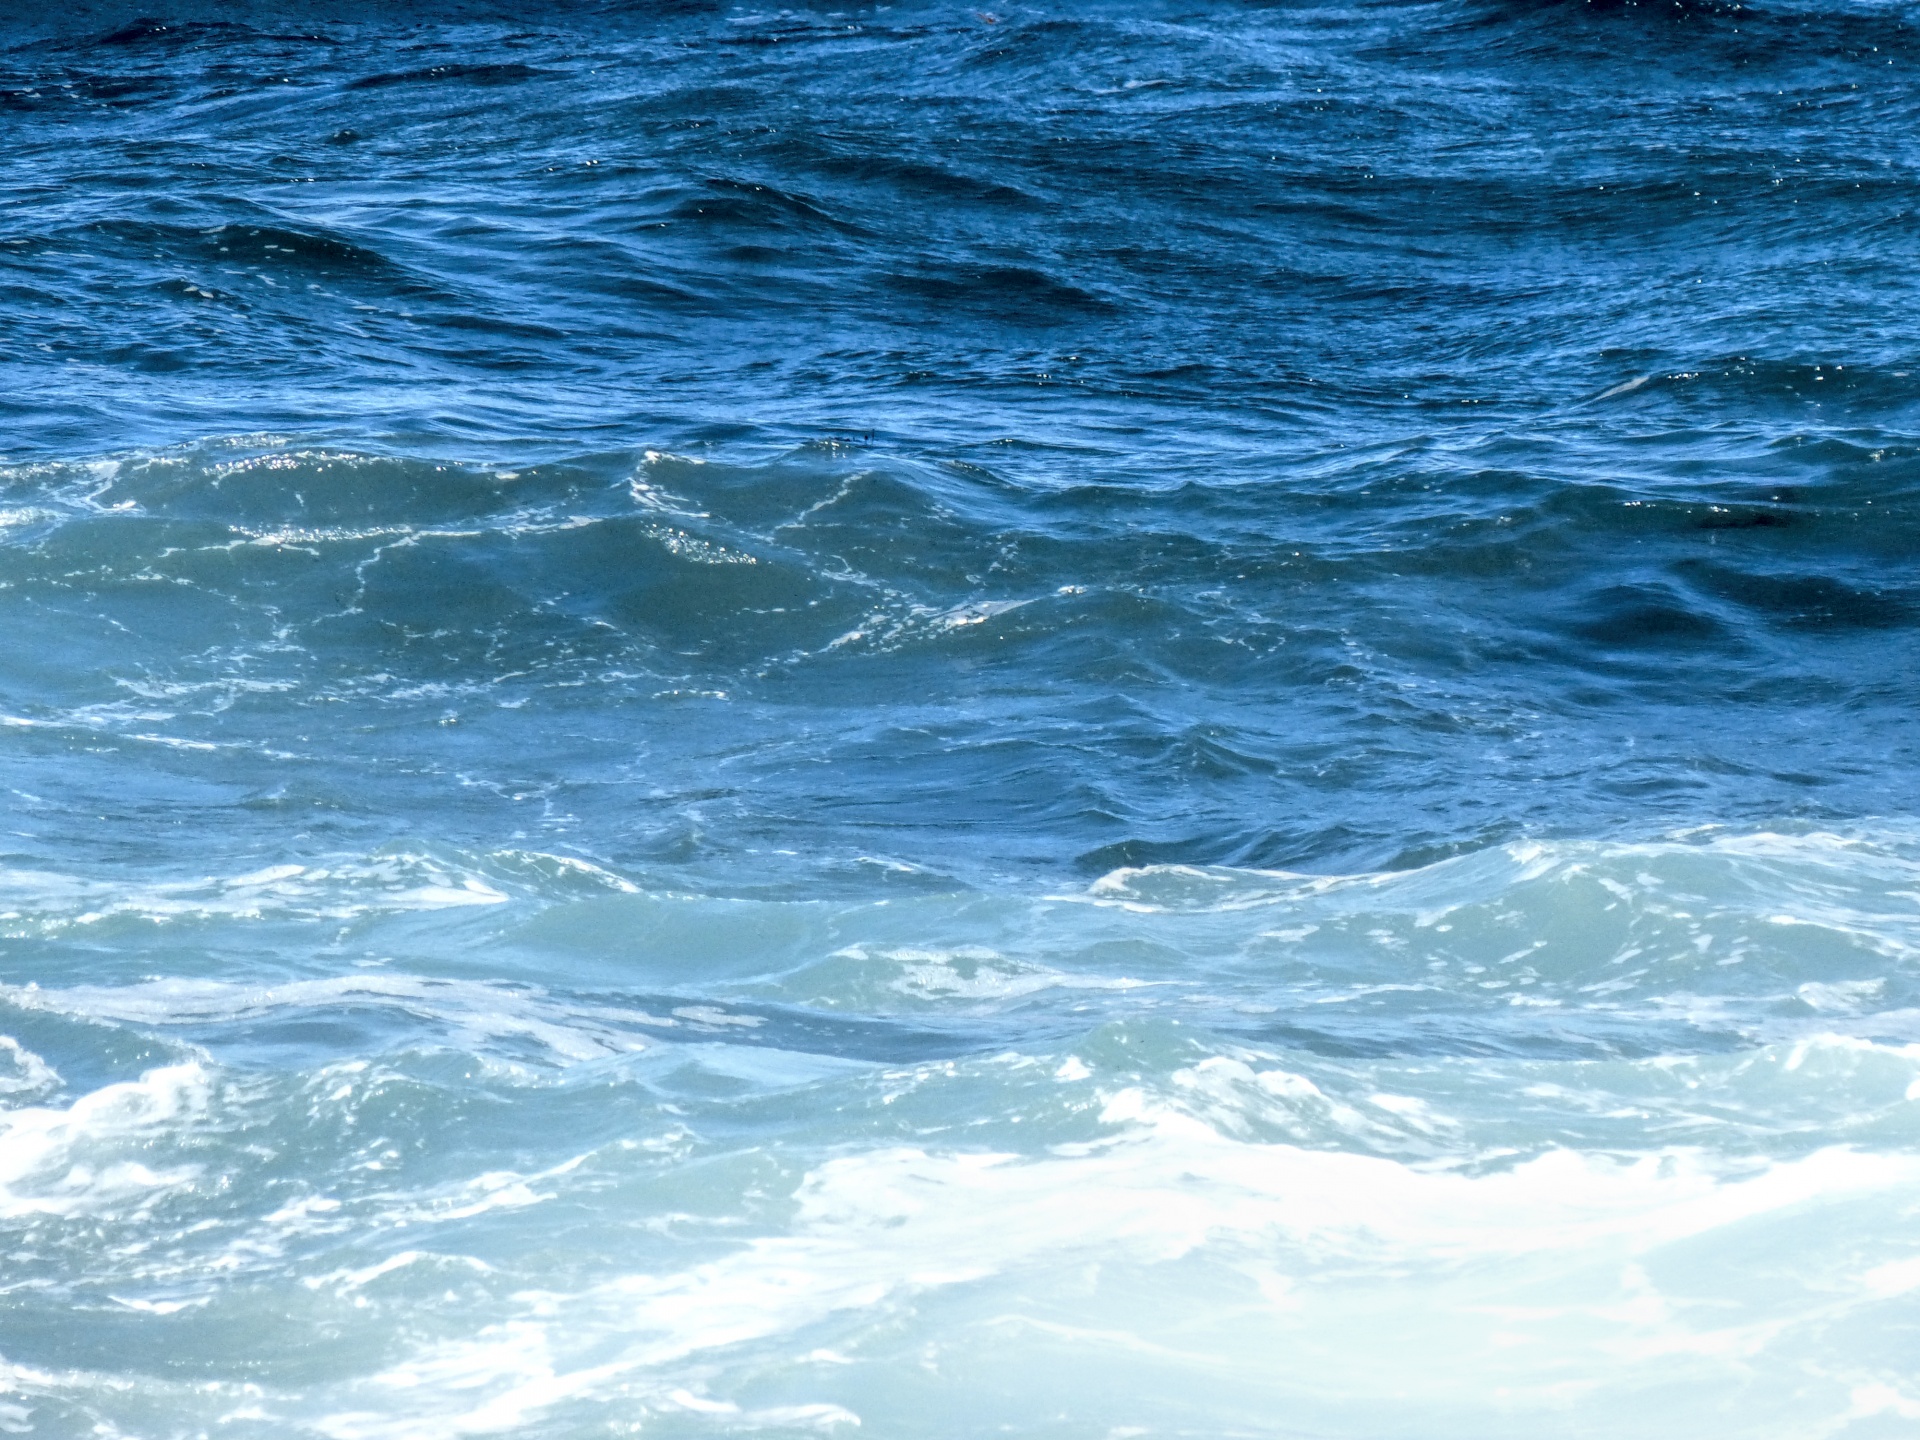 Ocean waves in multiple color shades of blue. from deep turquoise to pale blue-green